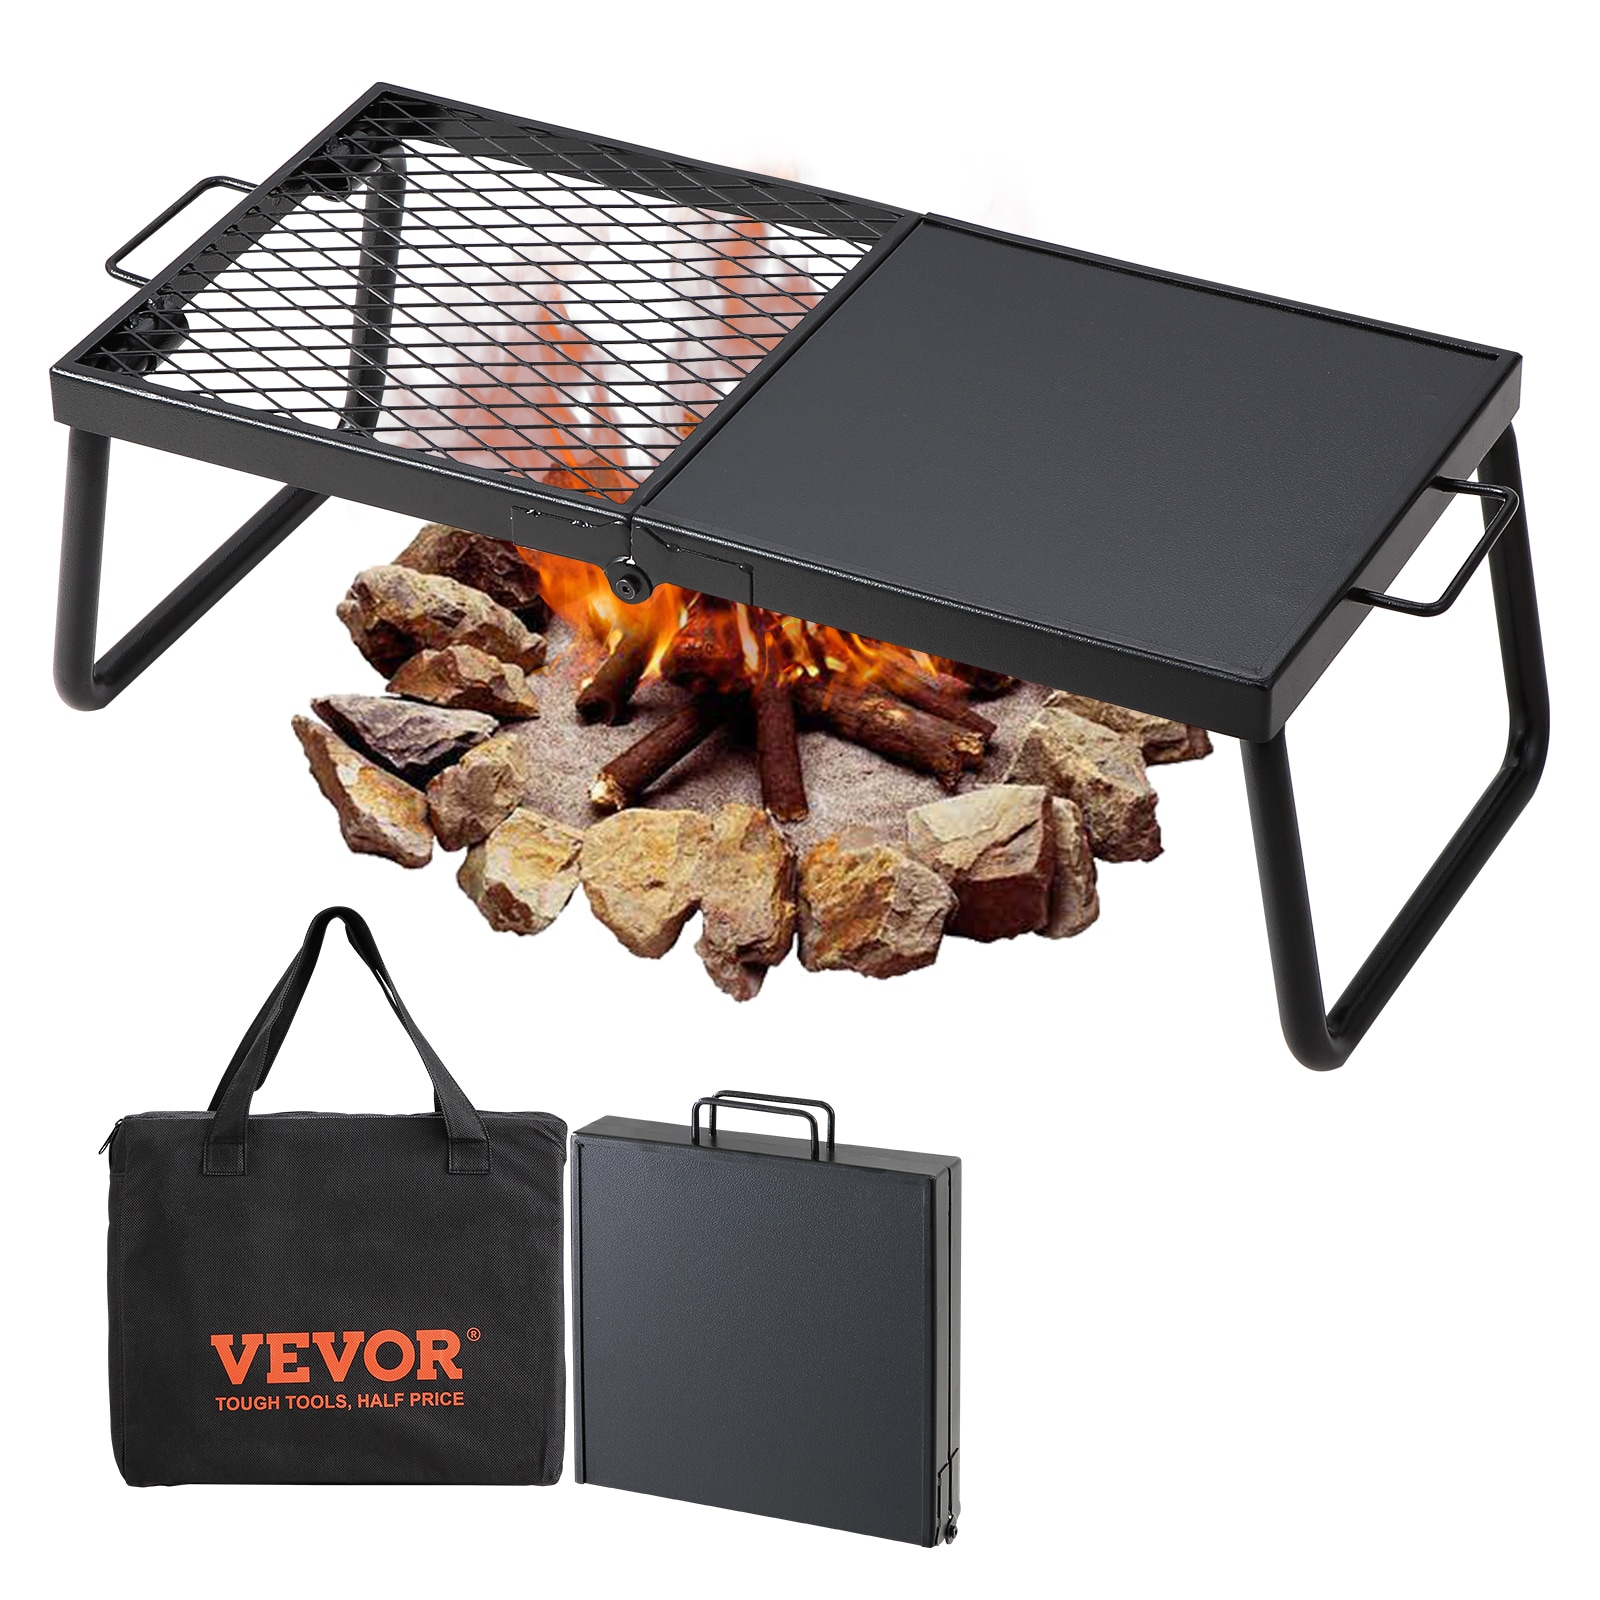 VEVOR 2-in-1-Electric Grill and Hot Pot Foldable BBQ Pan Grill